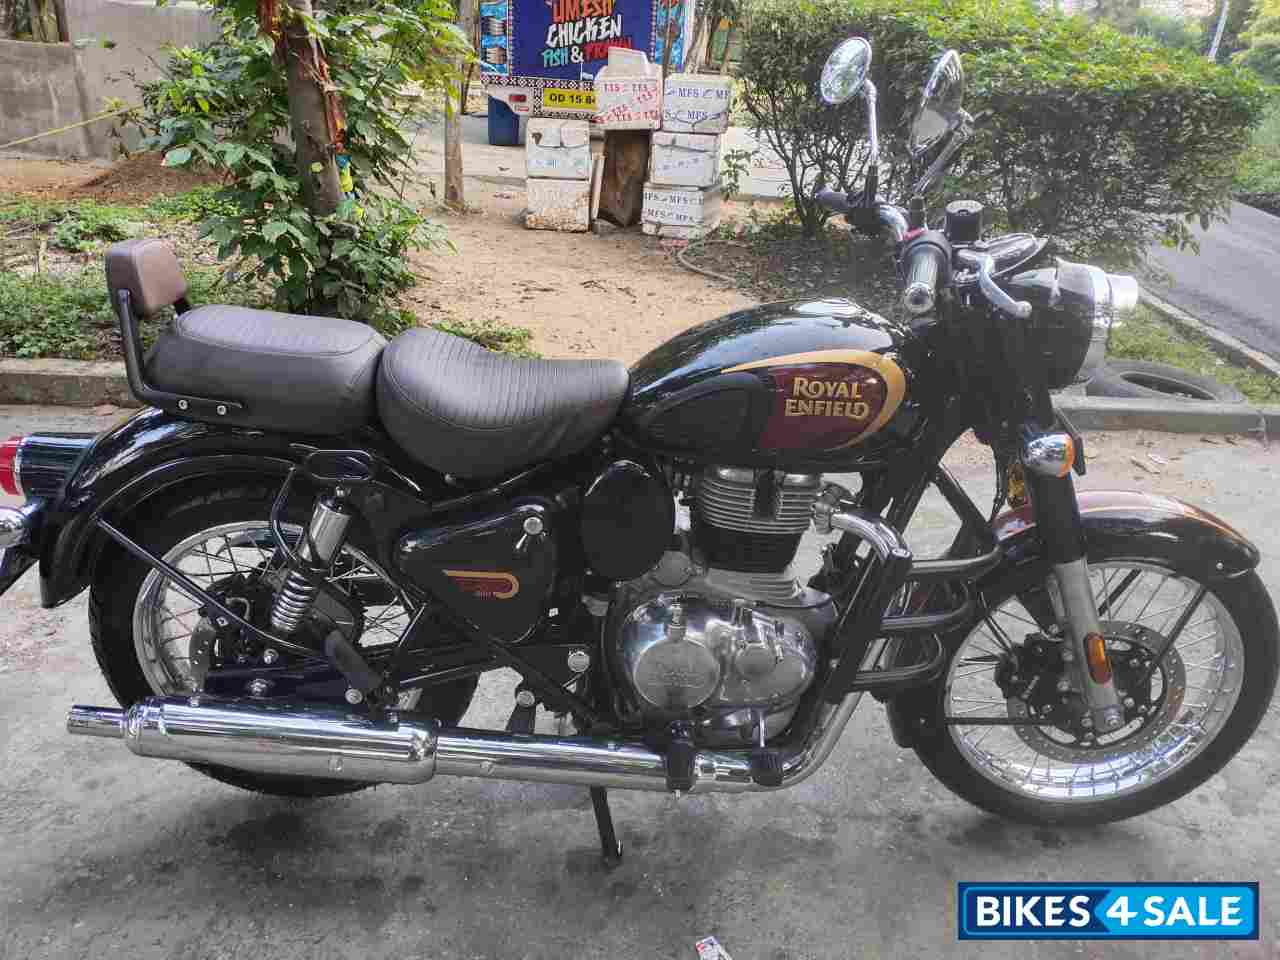 Glossy Black Golden Royal Enfield Classic Classic reborn dual channel Abs.